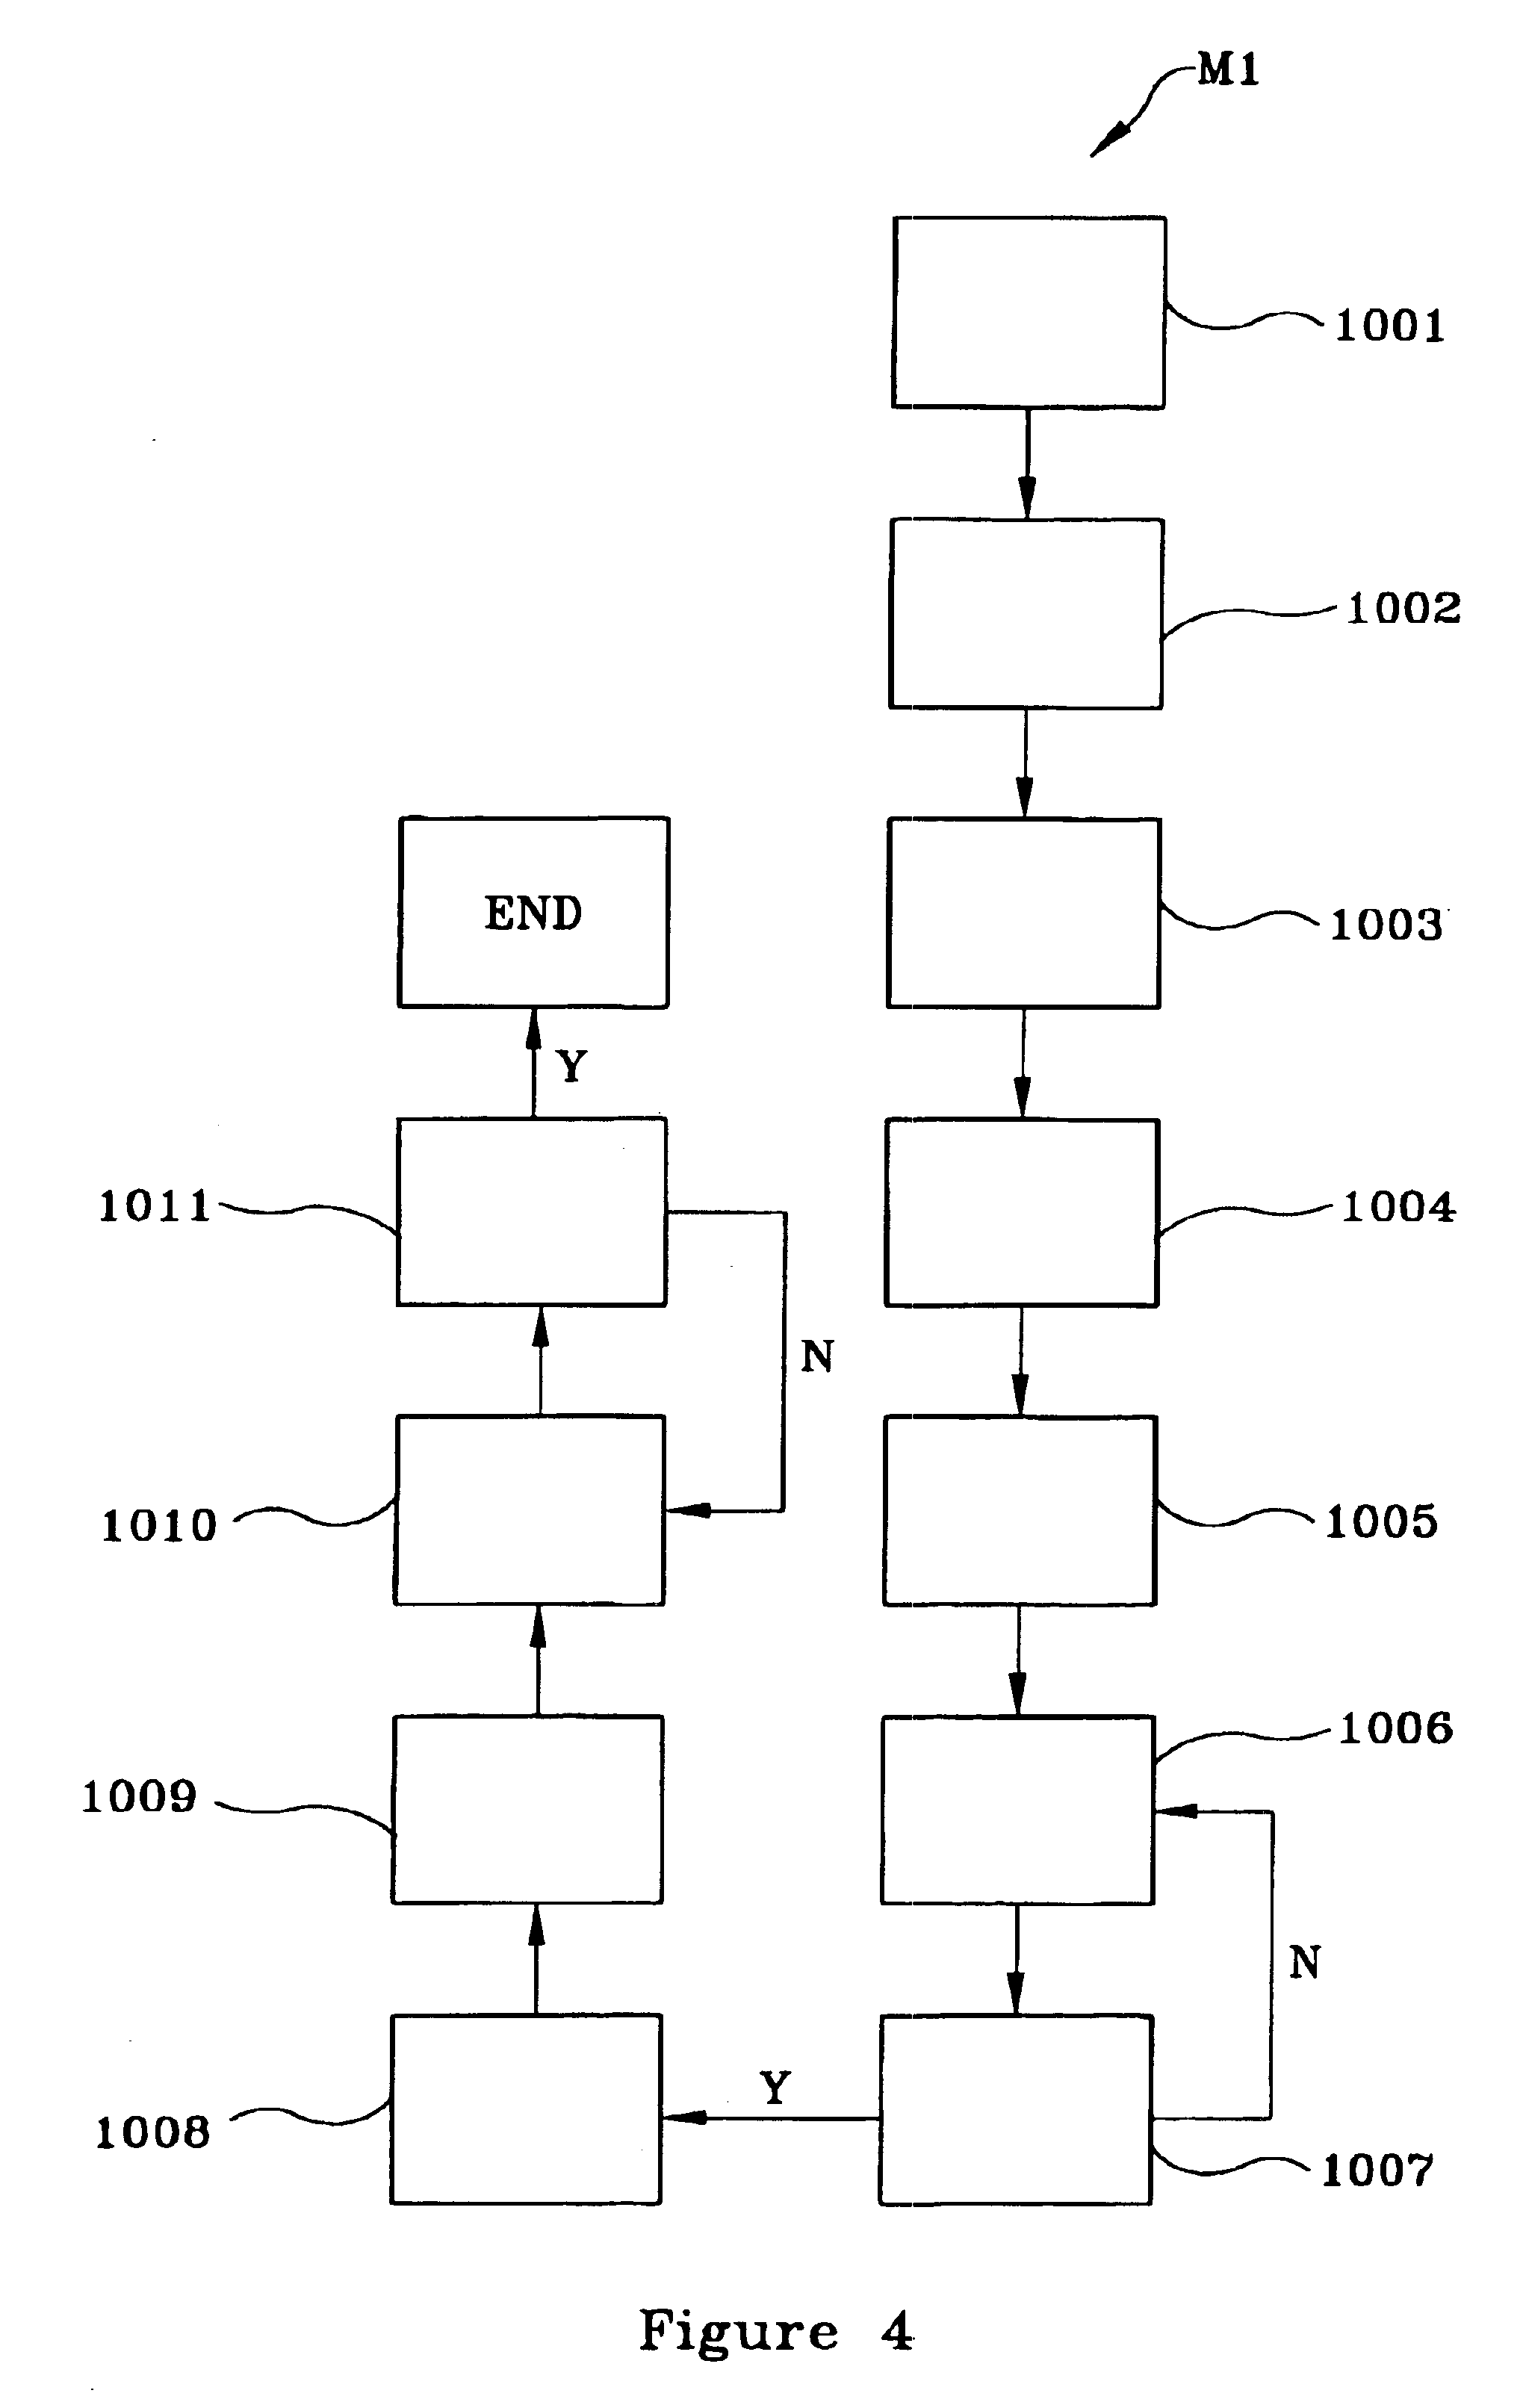 Method of controlling zinc-doping in a copper-zinc alloy thin film electroplated on a copper surface and a semiconductor device thereby formed